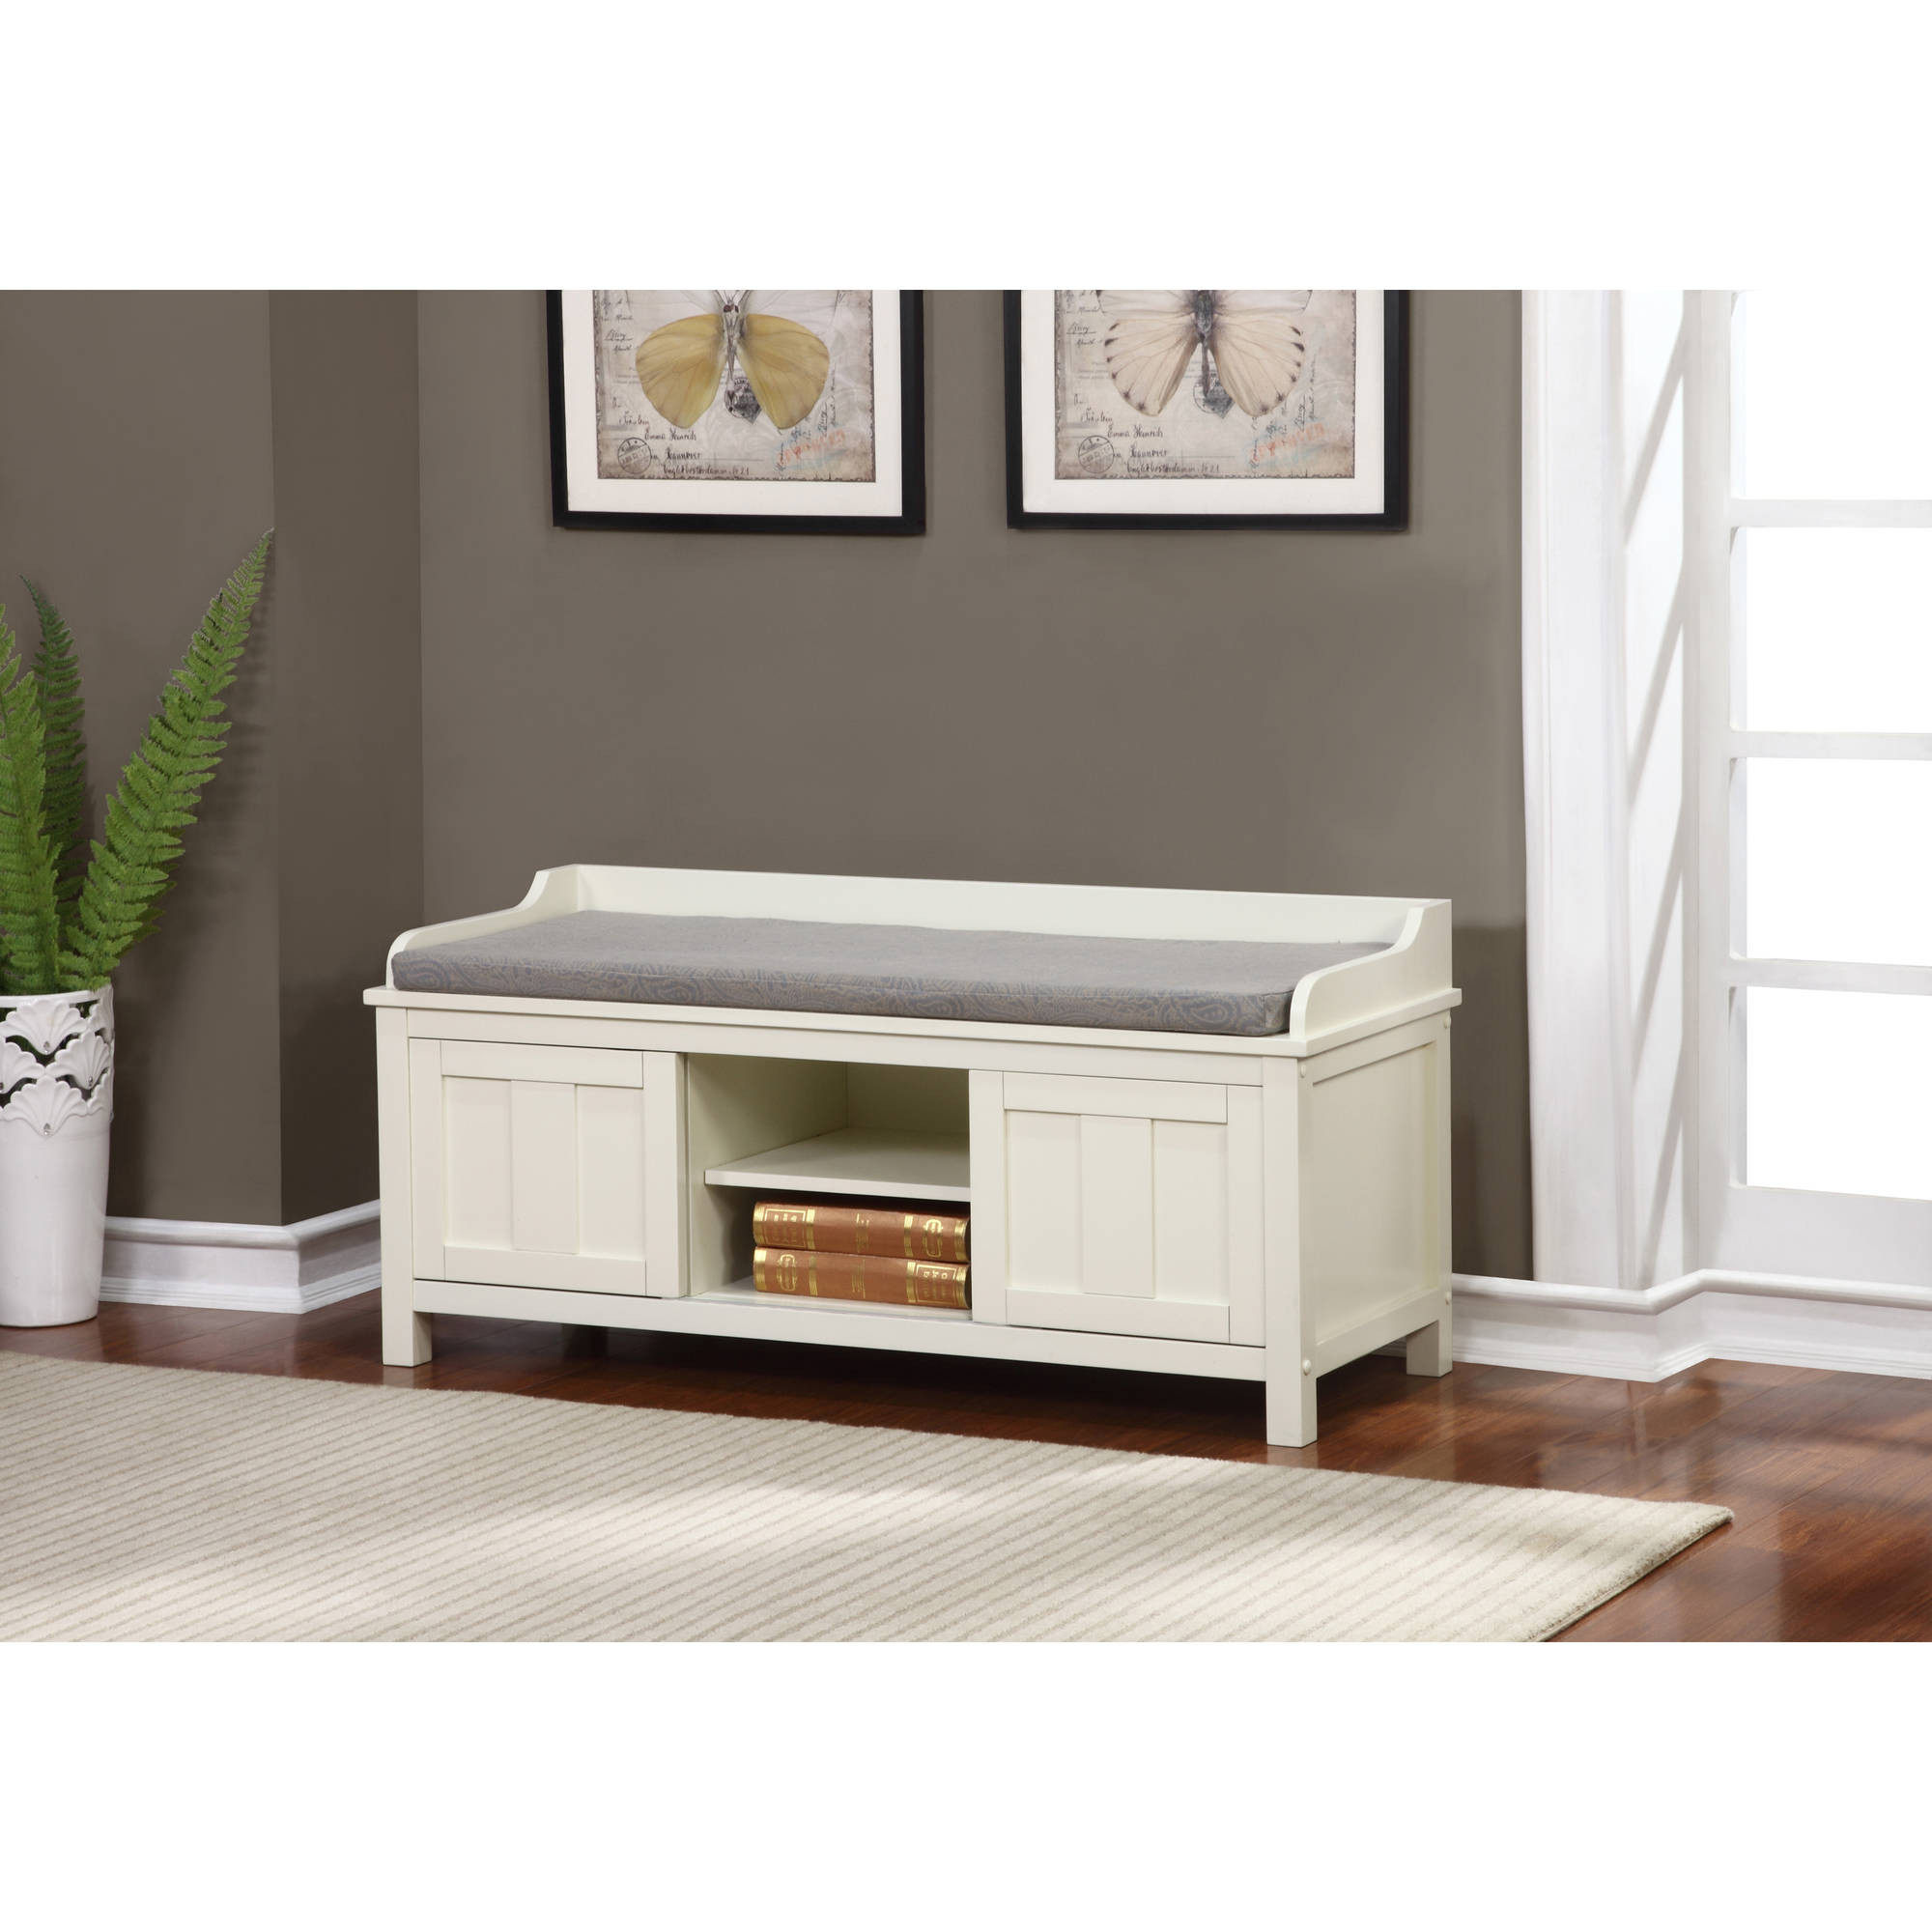 Storage Bench Seat Target
 Linon Lakeville 45" Antique White Storage Bench with